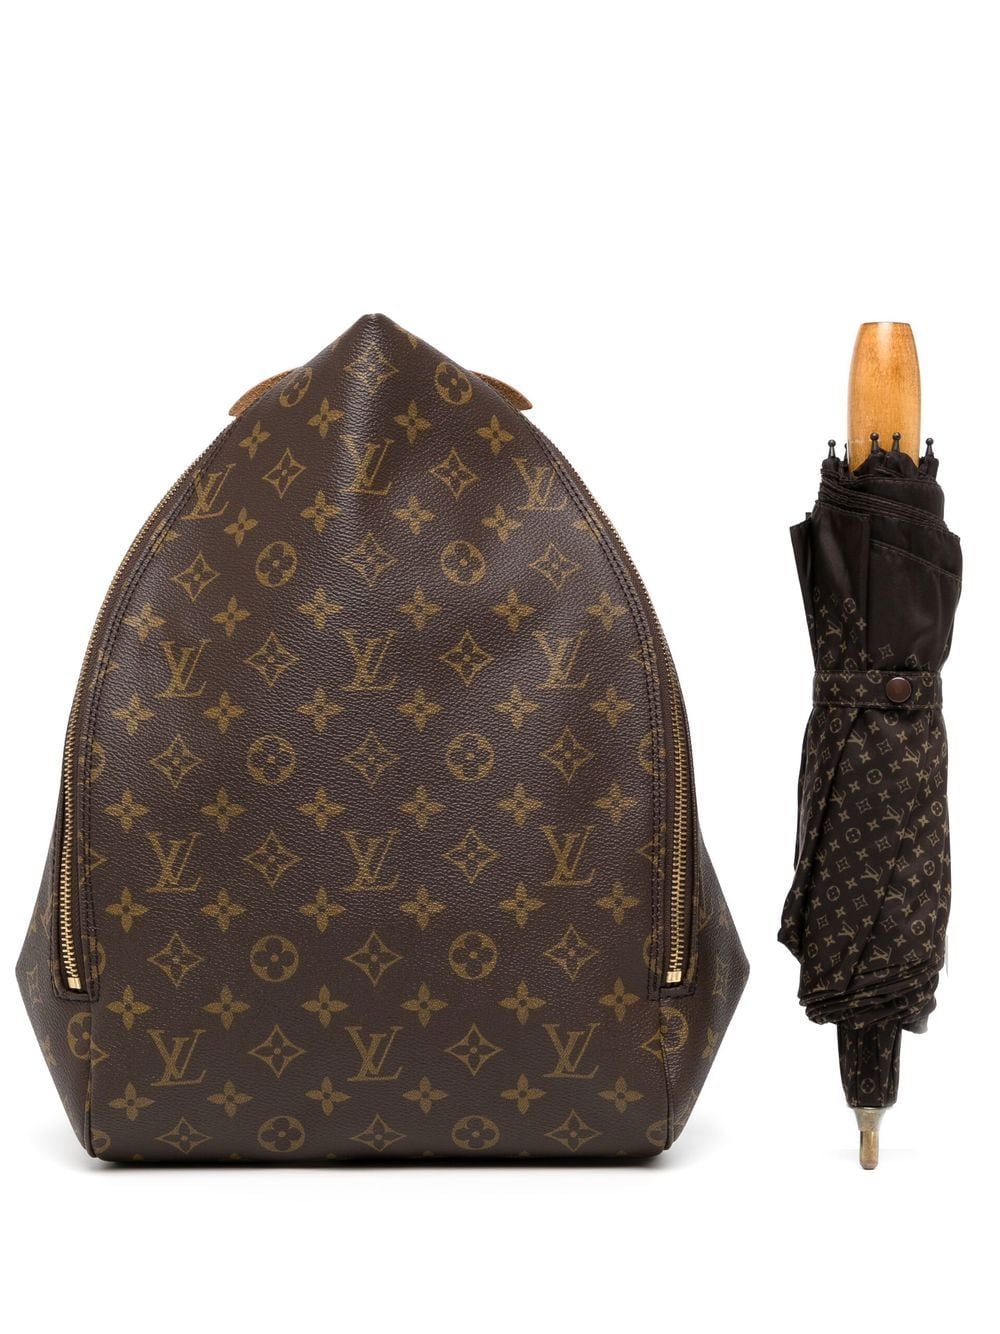 Louis Vuitton 1996 pre-owned Limited Edition Arlequin Backpack - Farfetch